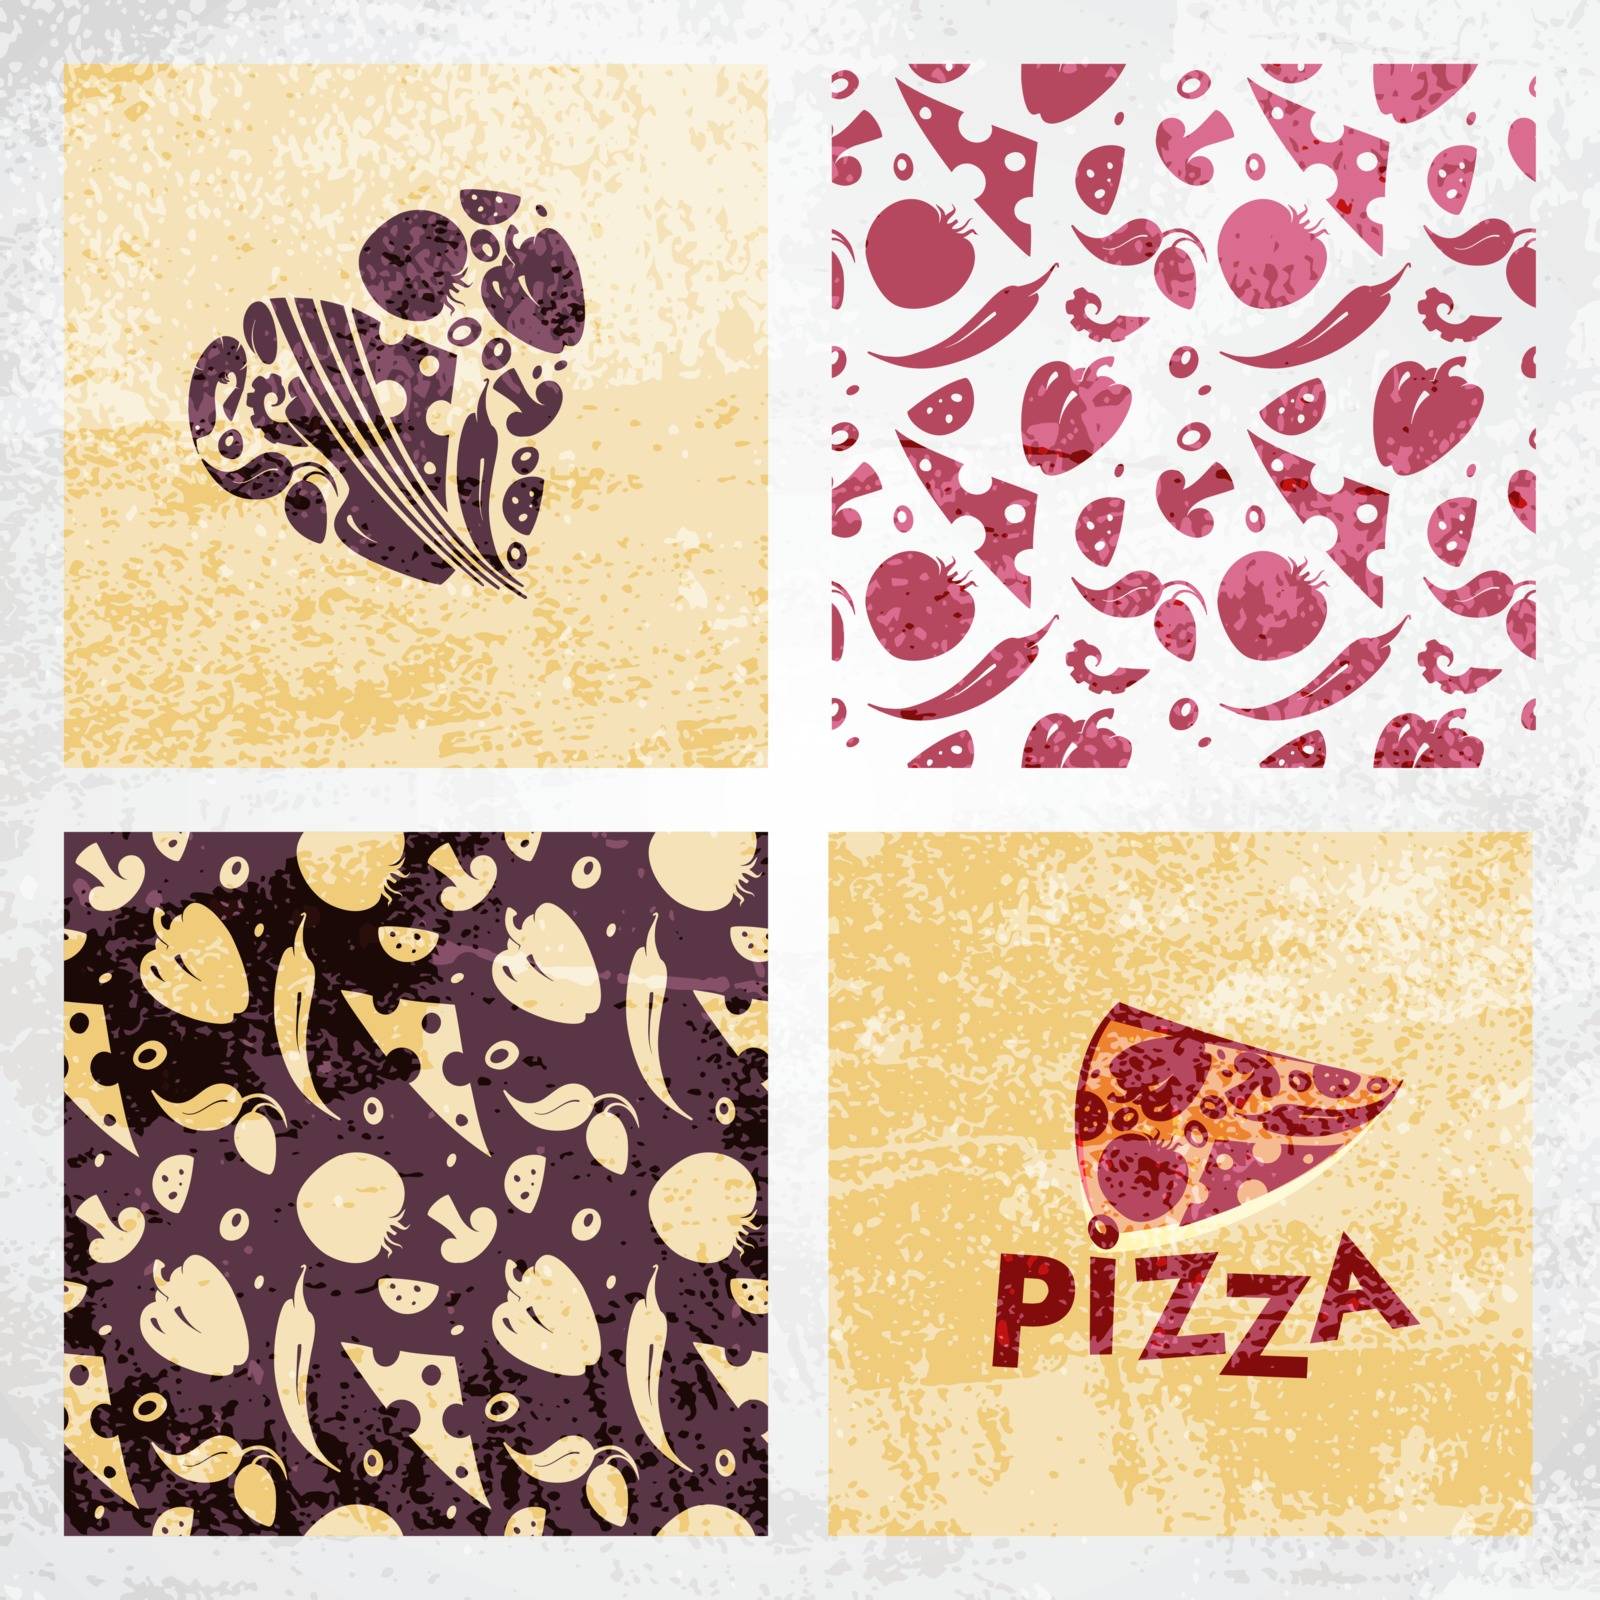 Pizza background by kartyl